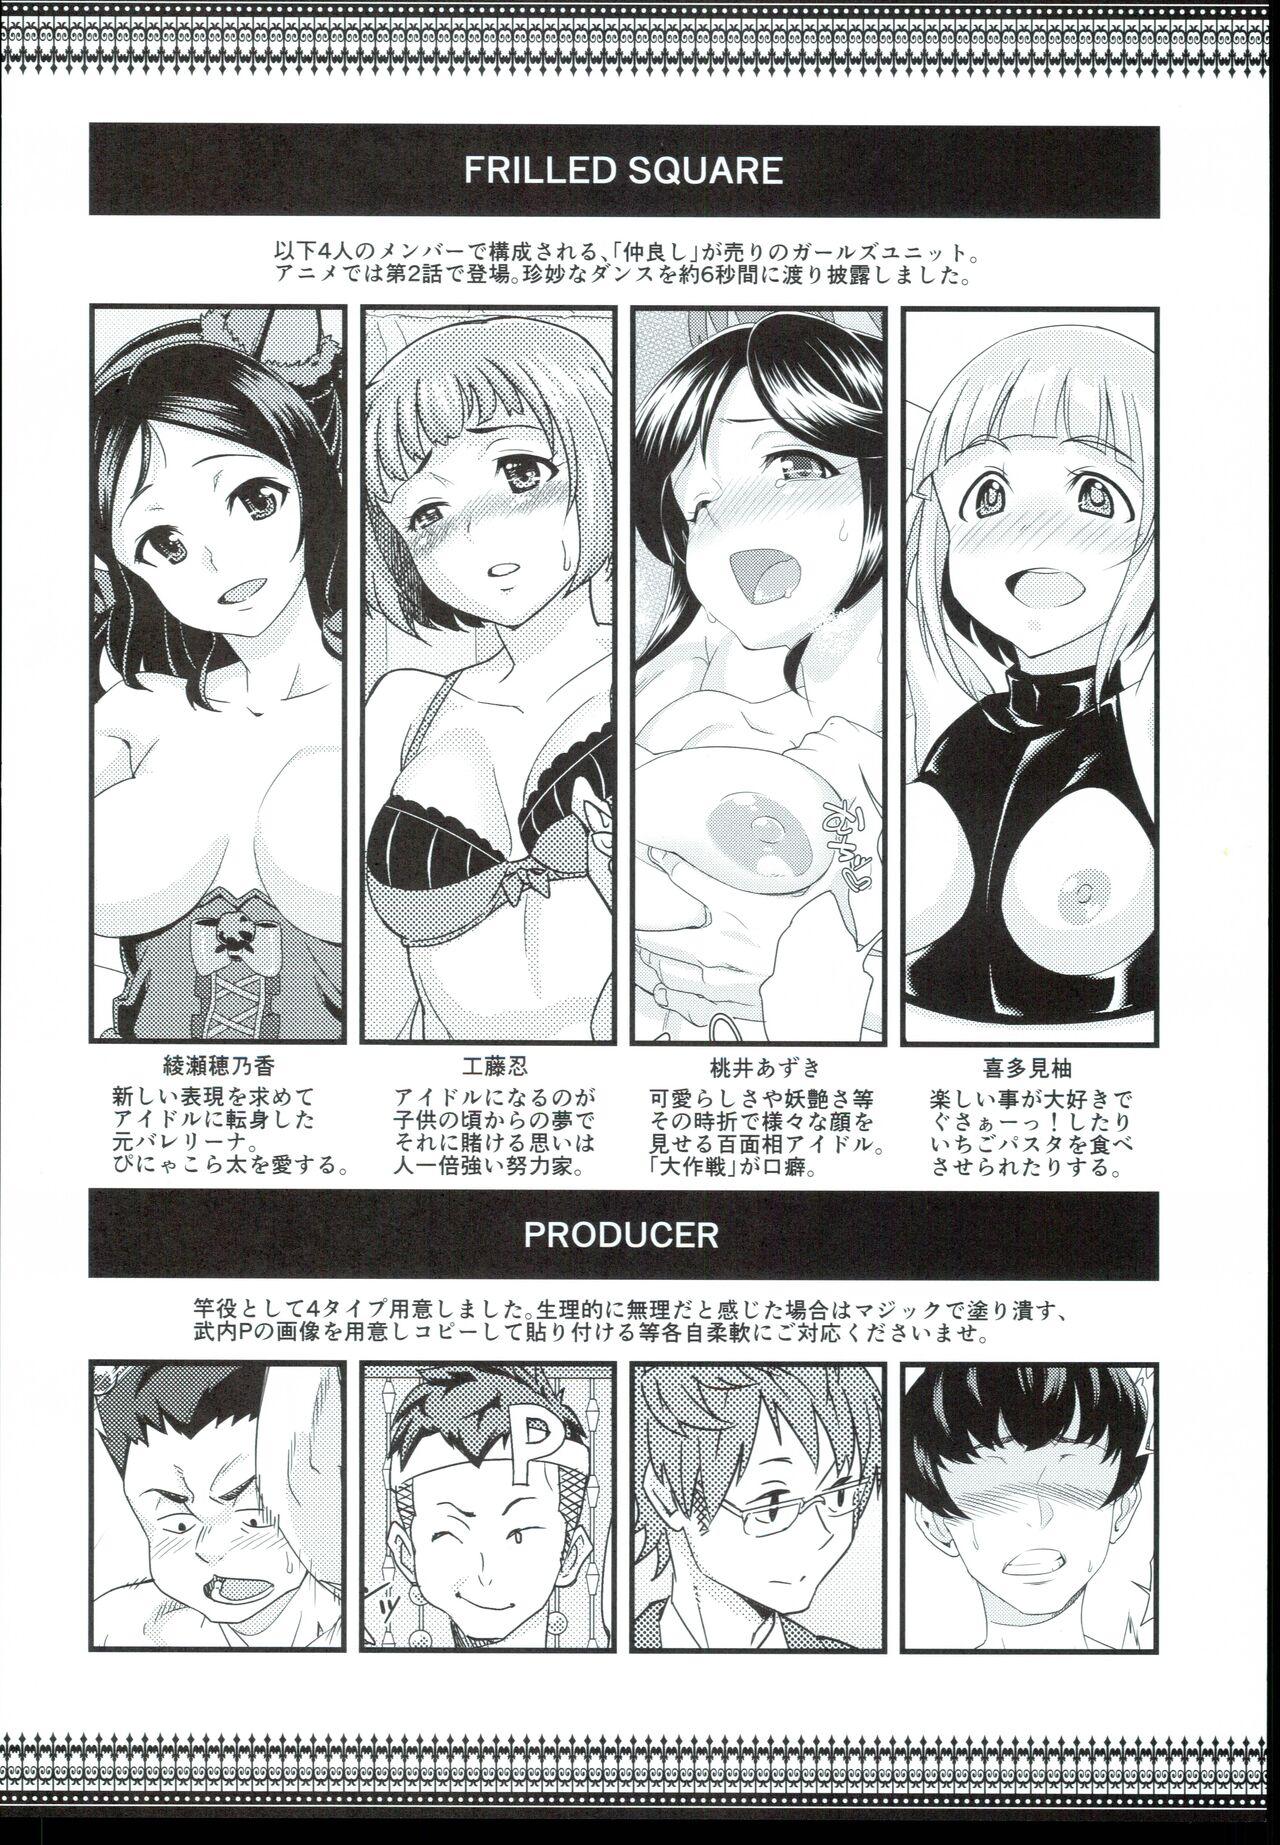 Girls FRILLED SQUARE no Erohon FRISQE - The idolmaster Family - Page 4